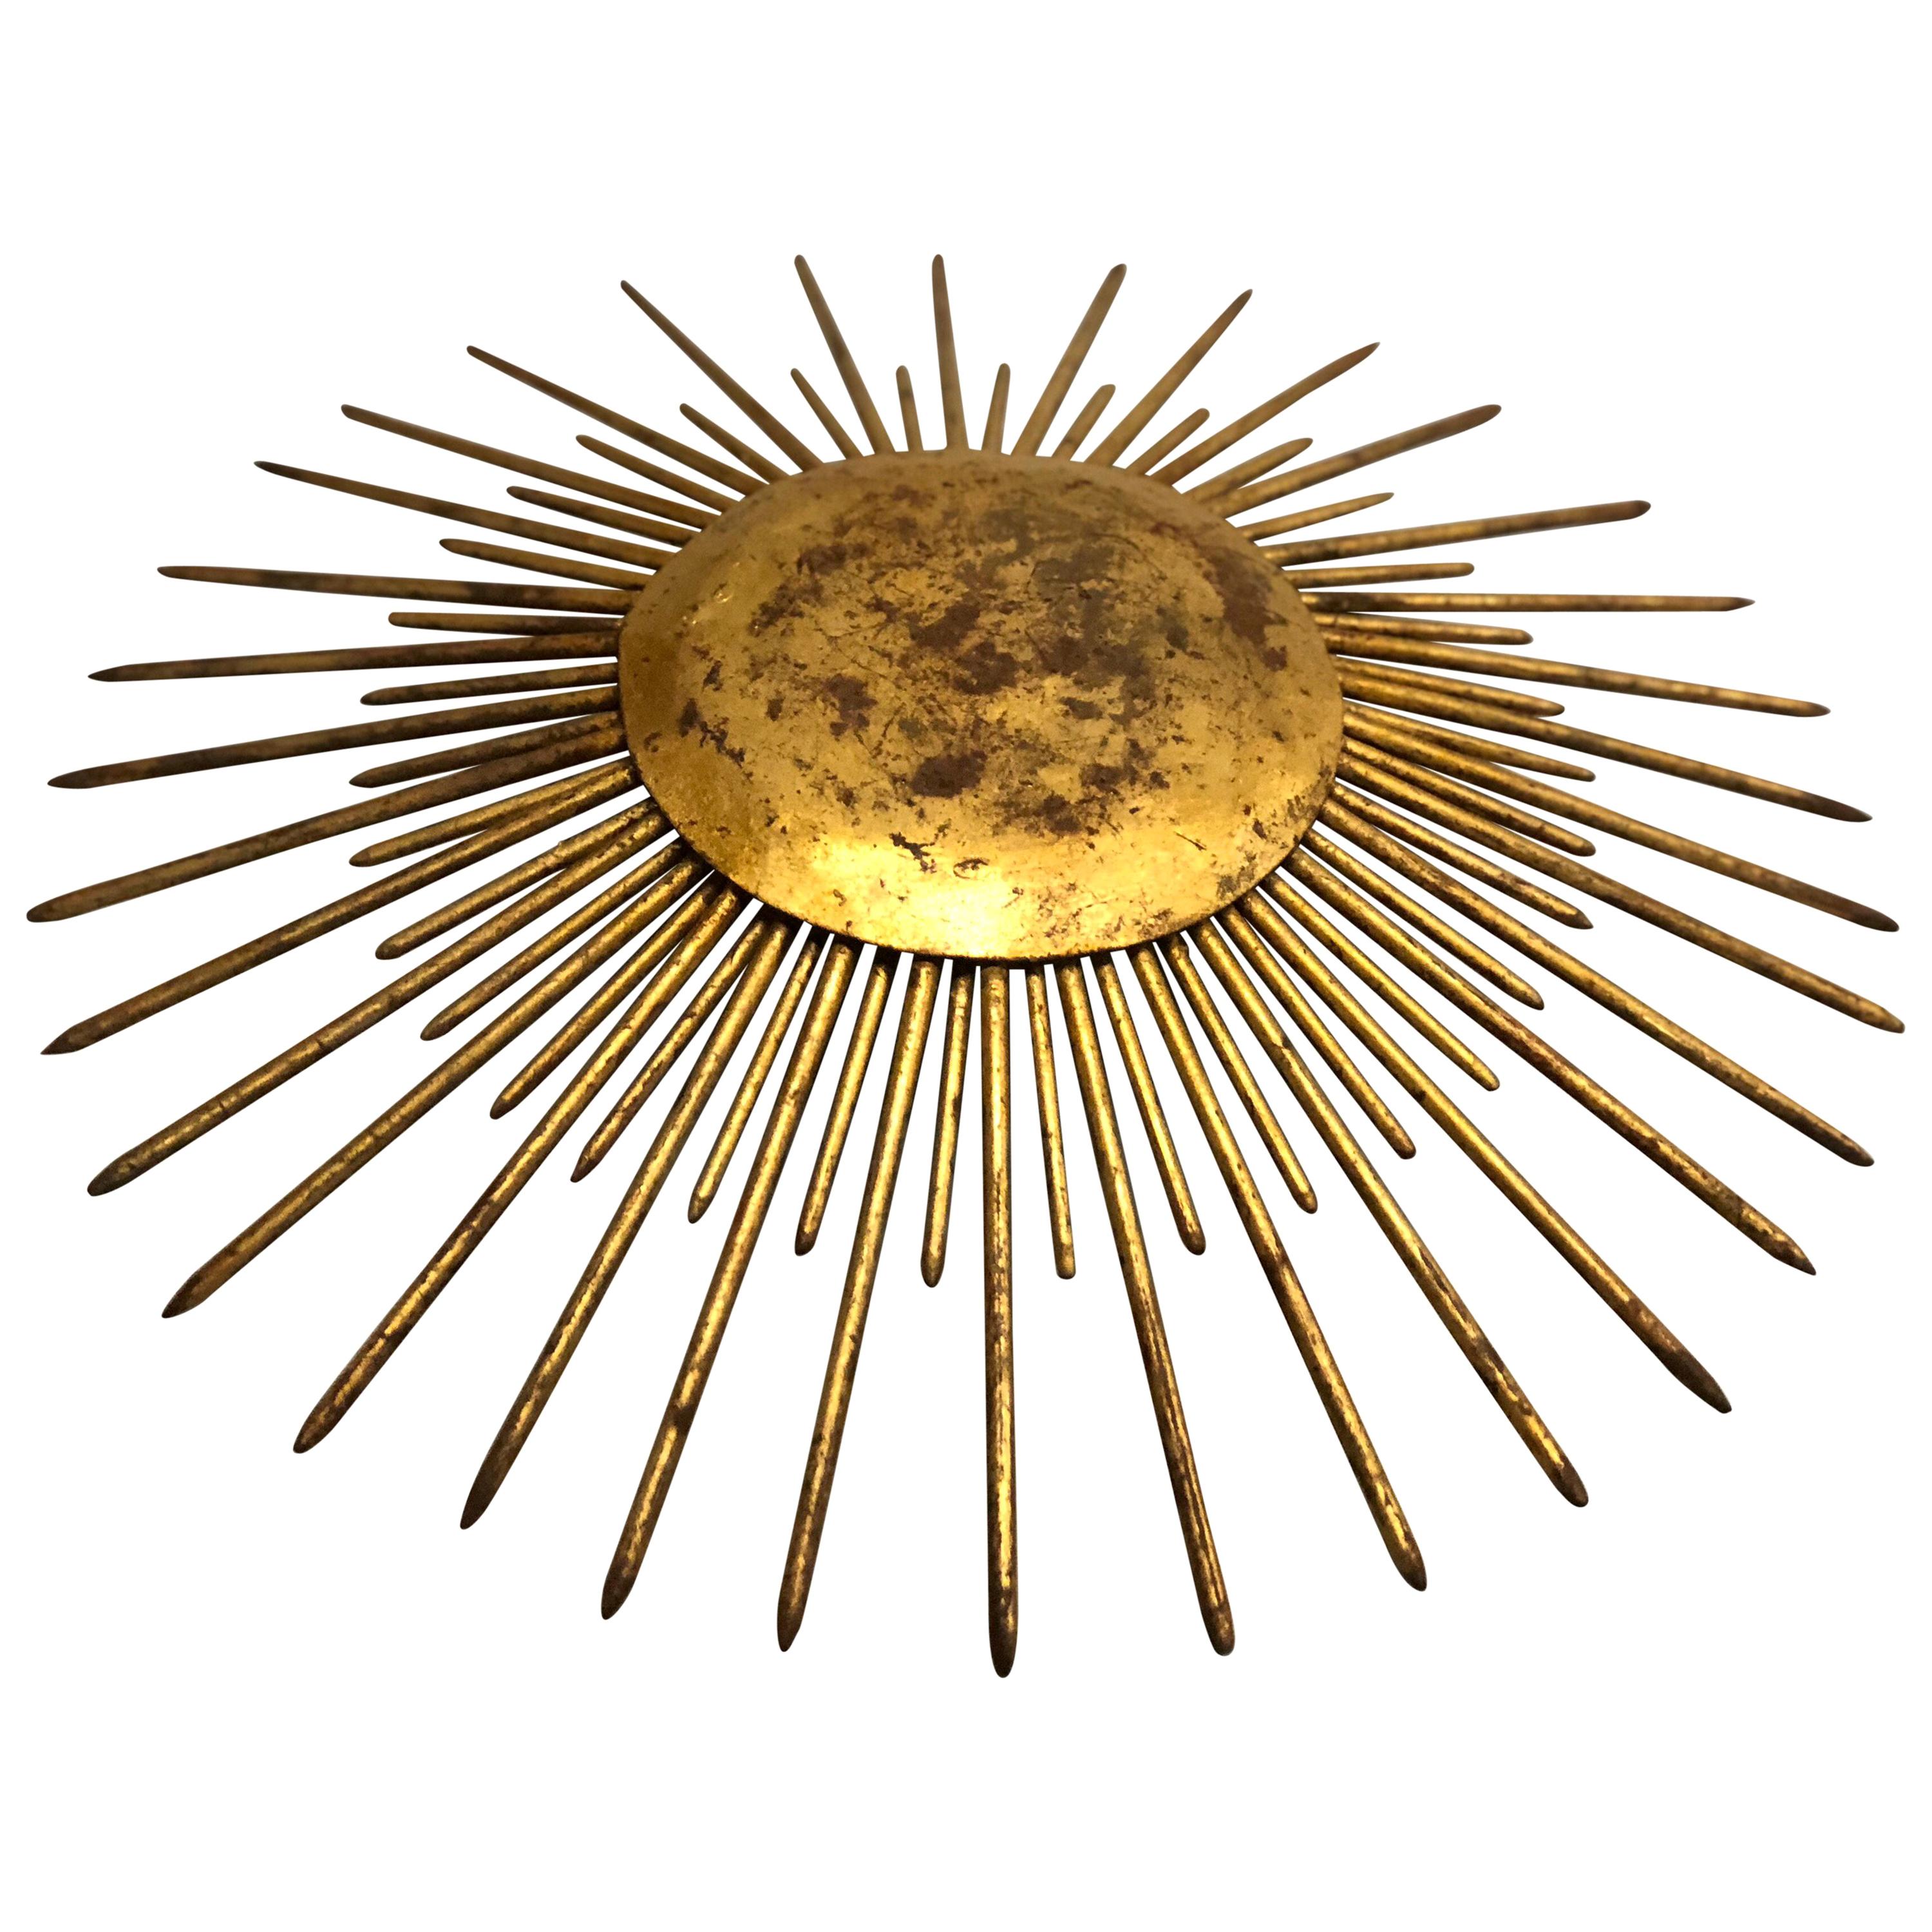 French Mid-Century Modern neoclassical gilt iron sunburst flush mount fixture or pendant.

Authentic, original patina and an elegant form with two rows of iron spikes forming the basis of the sunburst or star burst around a gilt iron round central